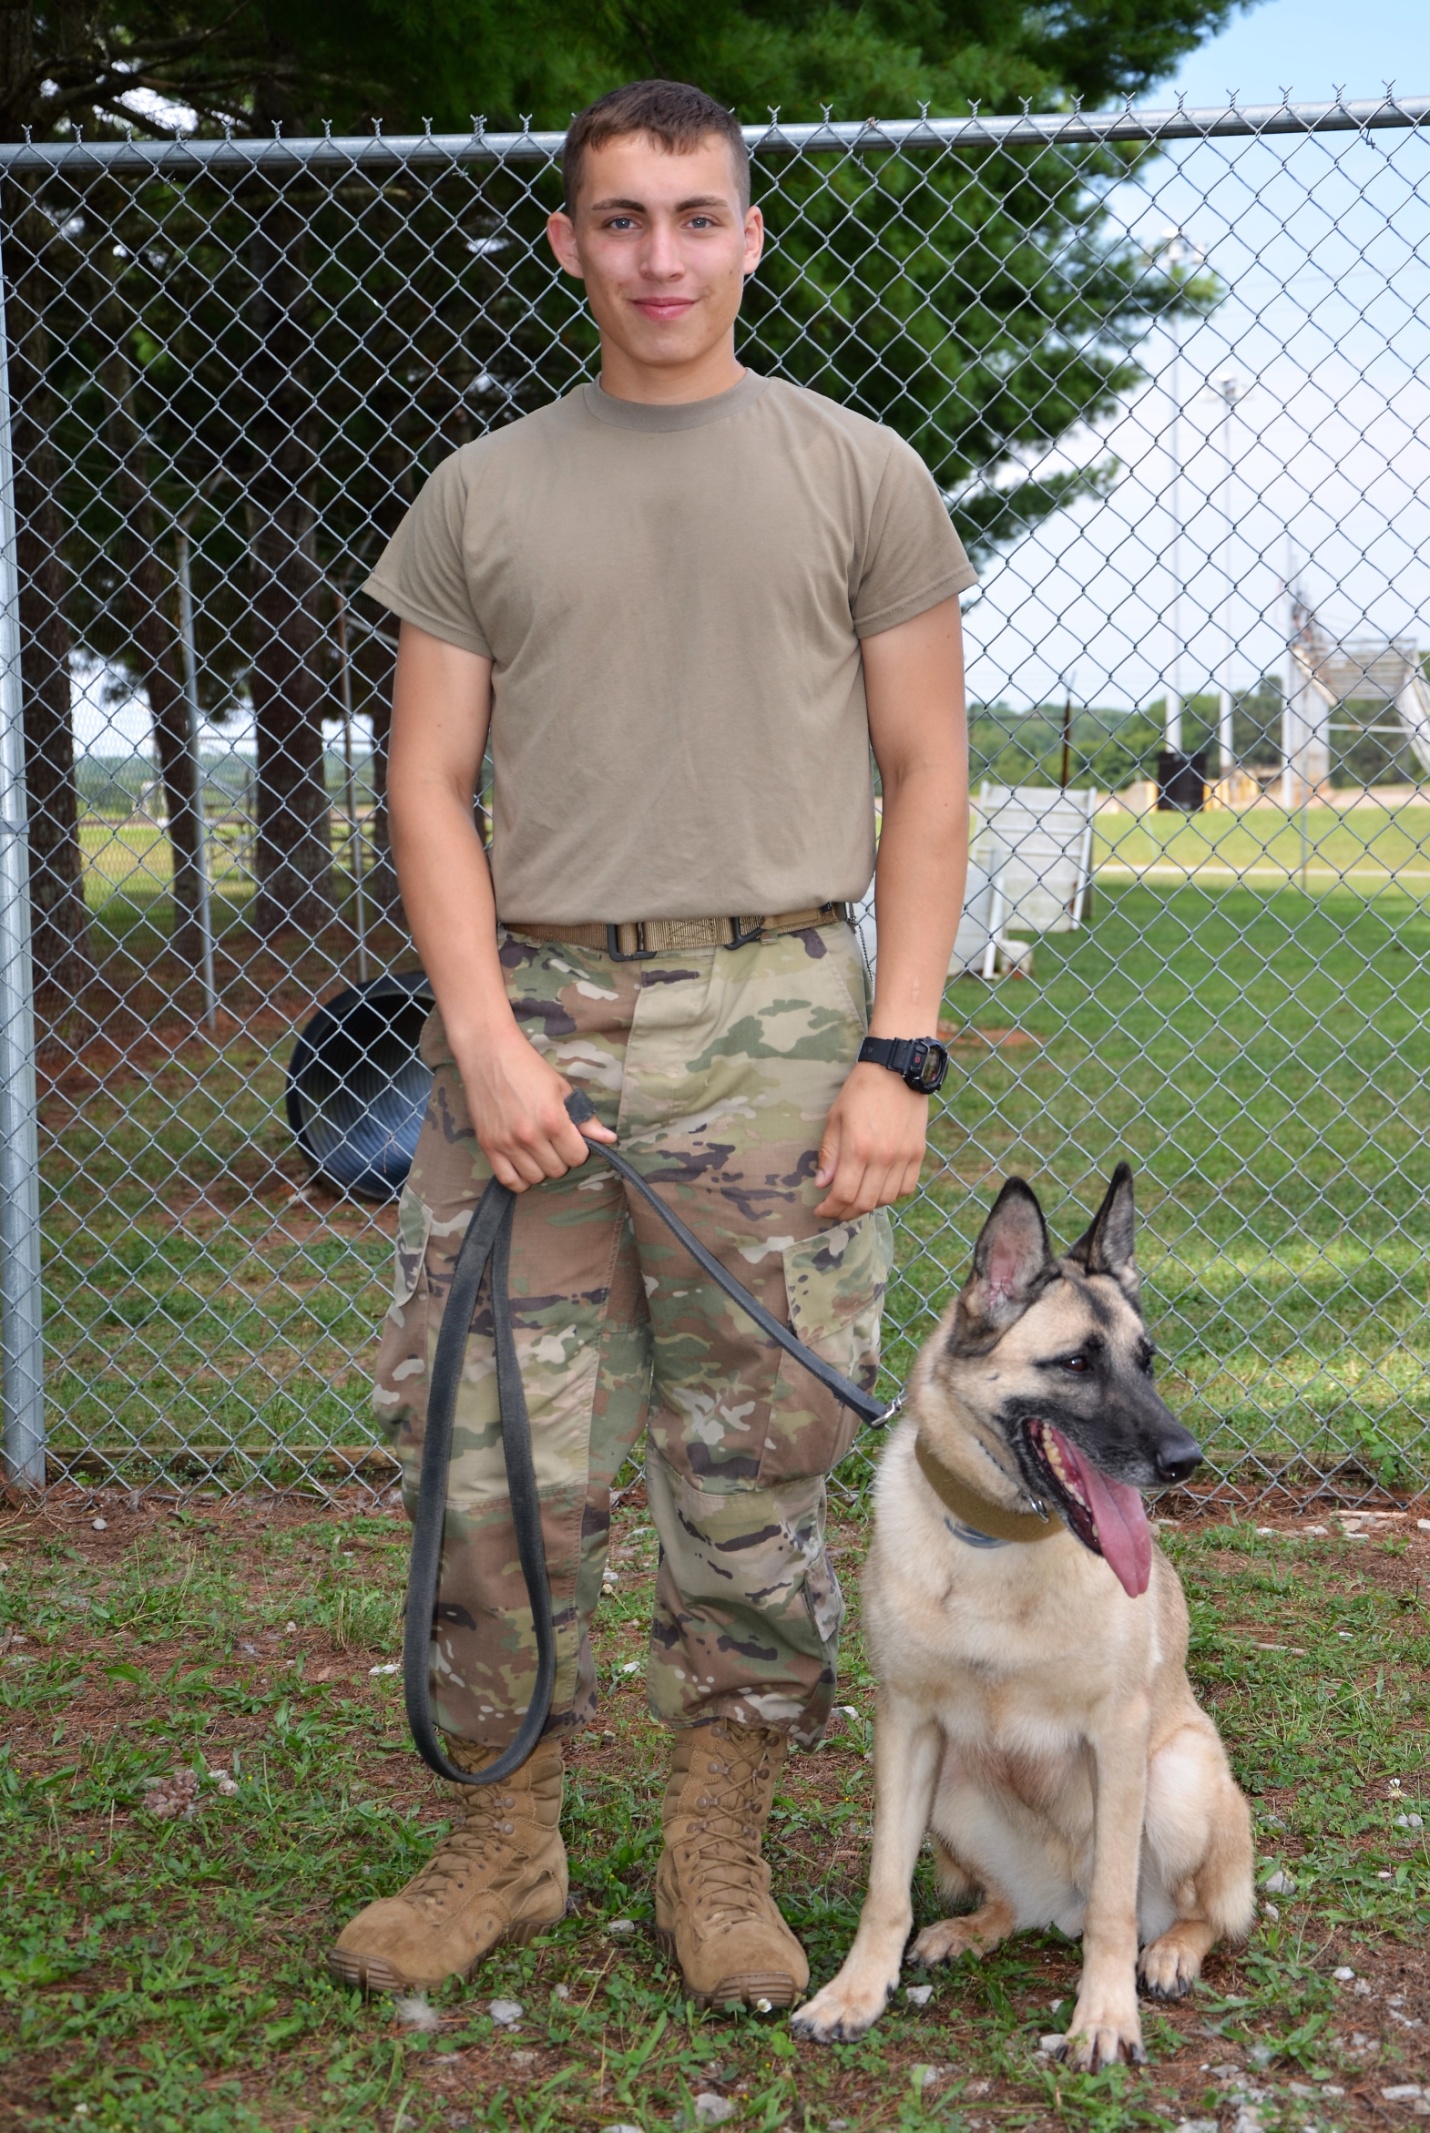 This photo shows a young Fort Campbell dog handler with his dog on leash.